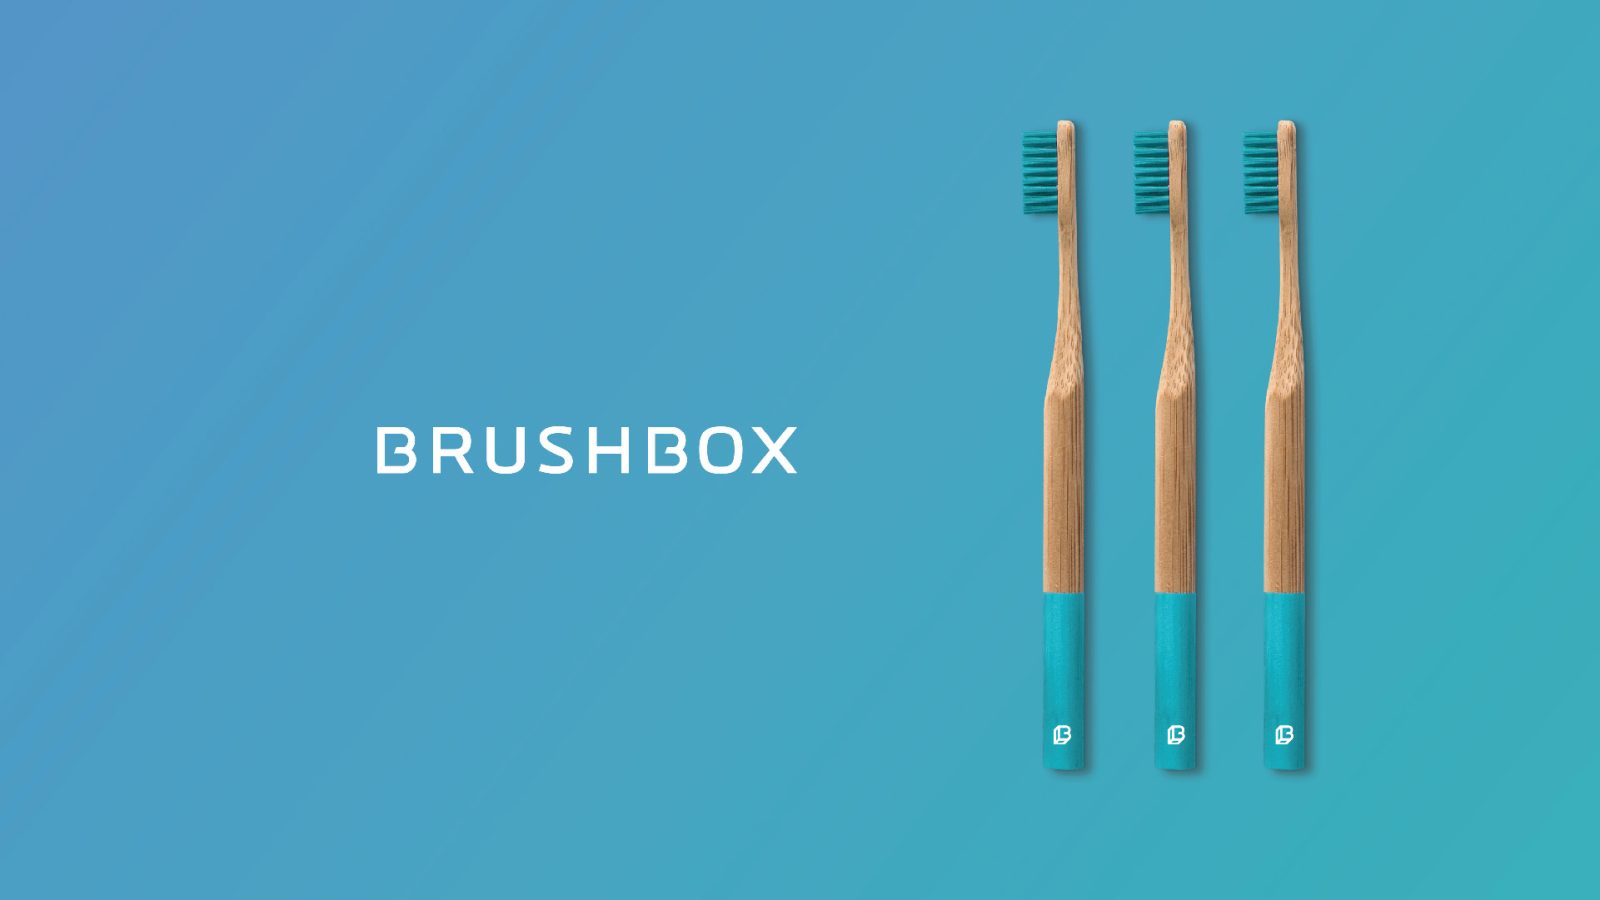 Three bamboo toothbrushes with blue handles lie horizontally on a teal background, labeled 